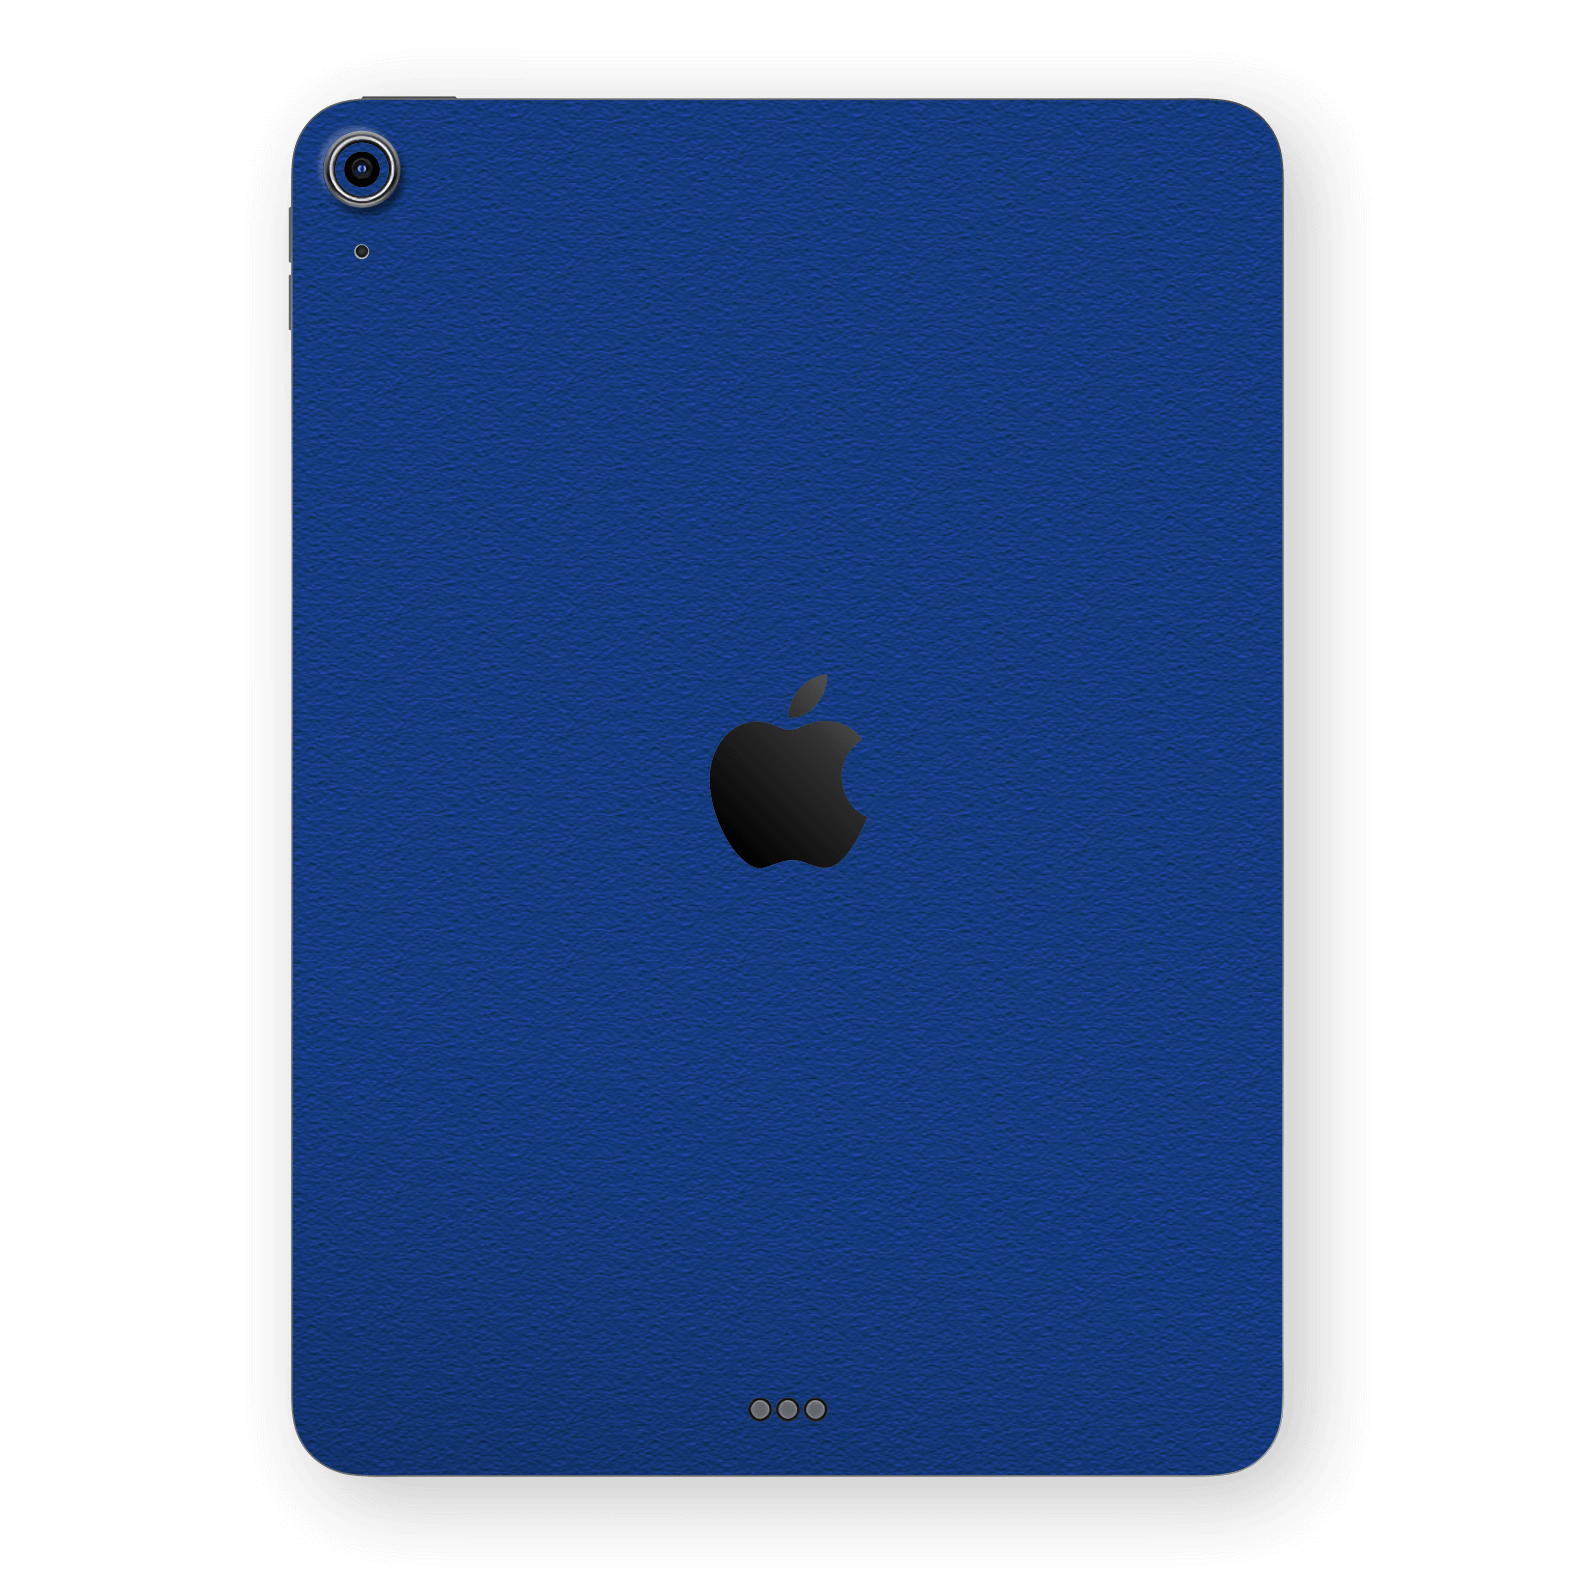 iPad Air 13” (M2) Luxuria Admiral Blue 3D Textured Skin Wrap Sticker Decal Cover Protector by QSKINZ | qskinz.com